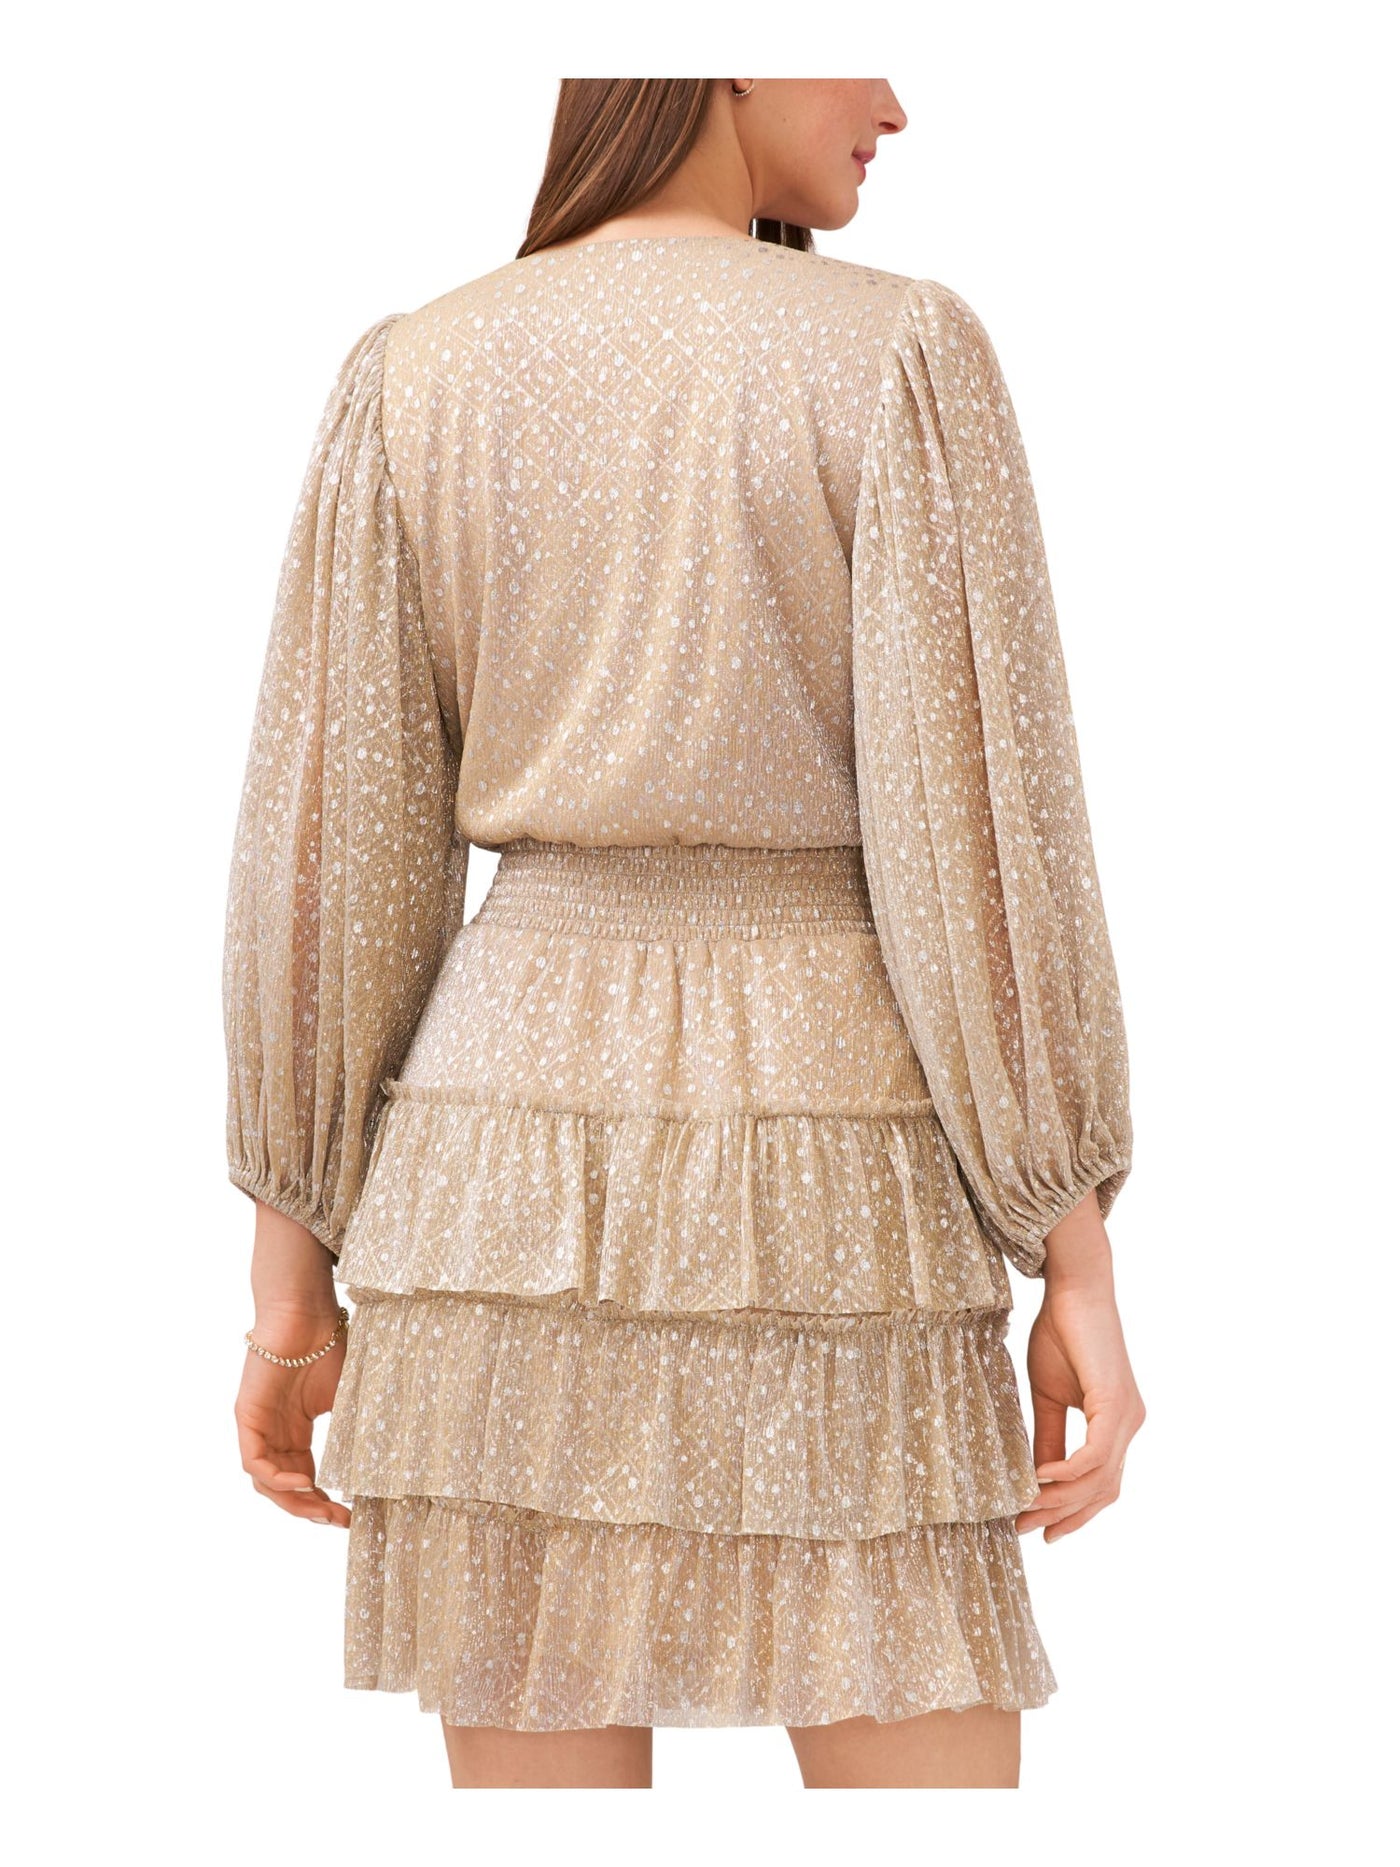 MSK Womens Gold Metallic Smocked Ruffled Lined Pullover Printed Blouson Sleeve Surplice Neckline Short Party Fit + Flare Dress S